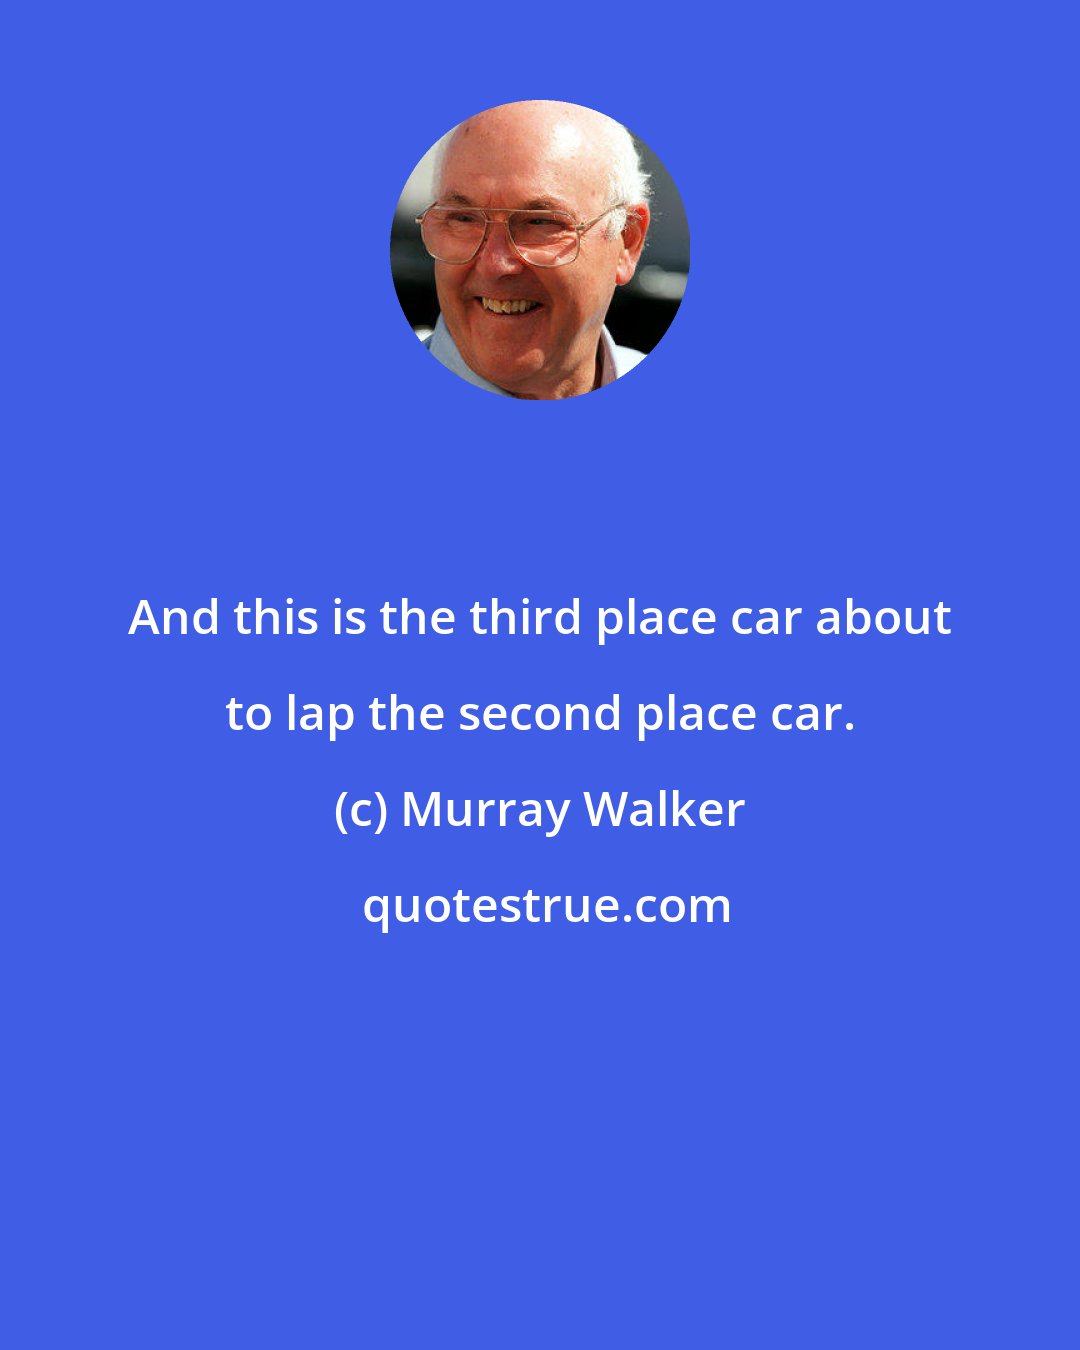 Murray Walker: And this is the third place car about to lap the second place car.